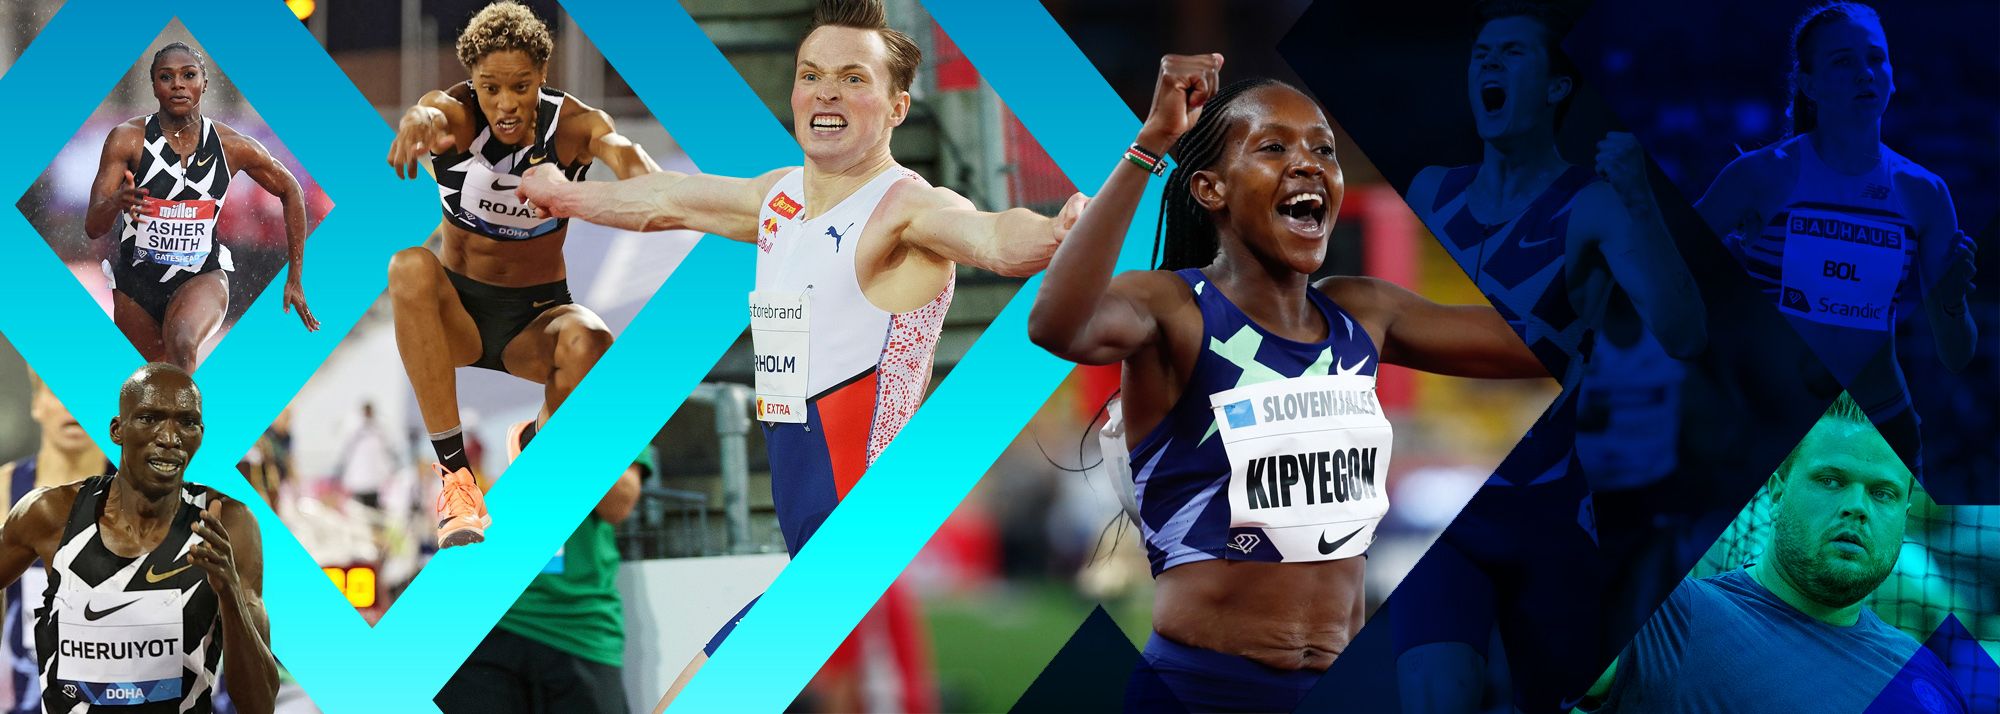 In the first of a two-part series, we look back at the highlights of a memorable 2021 Wanda Diamond League season.